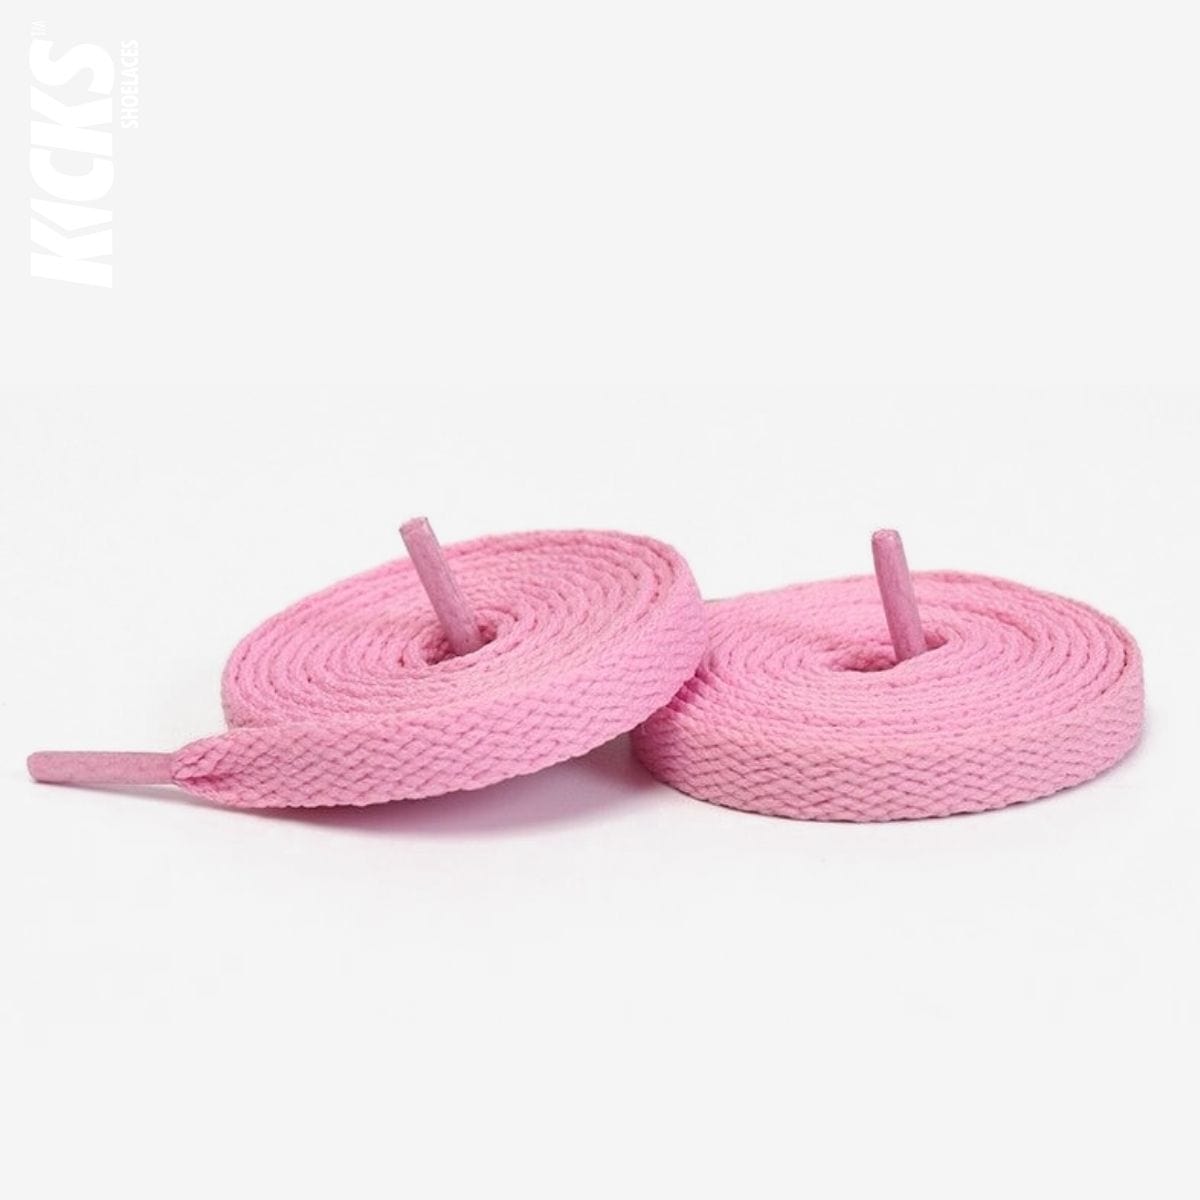 Pink Replacement Converse Laces for Converse All Star Sneakers by Kicks Shoelaces